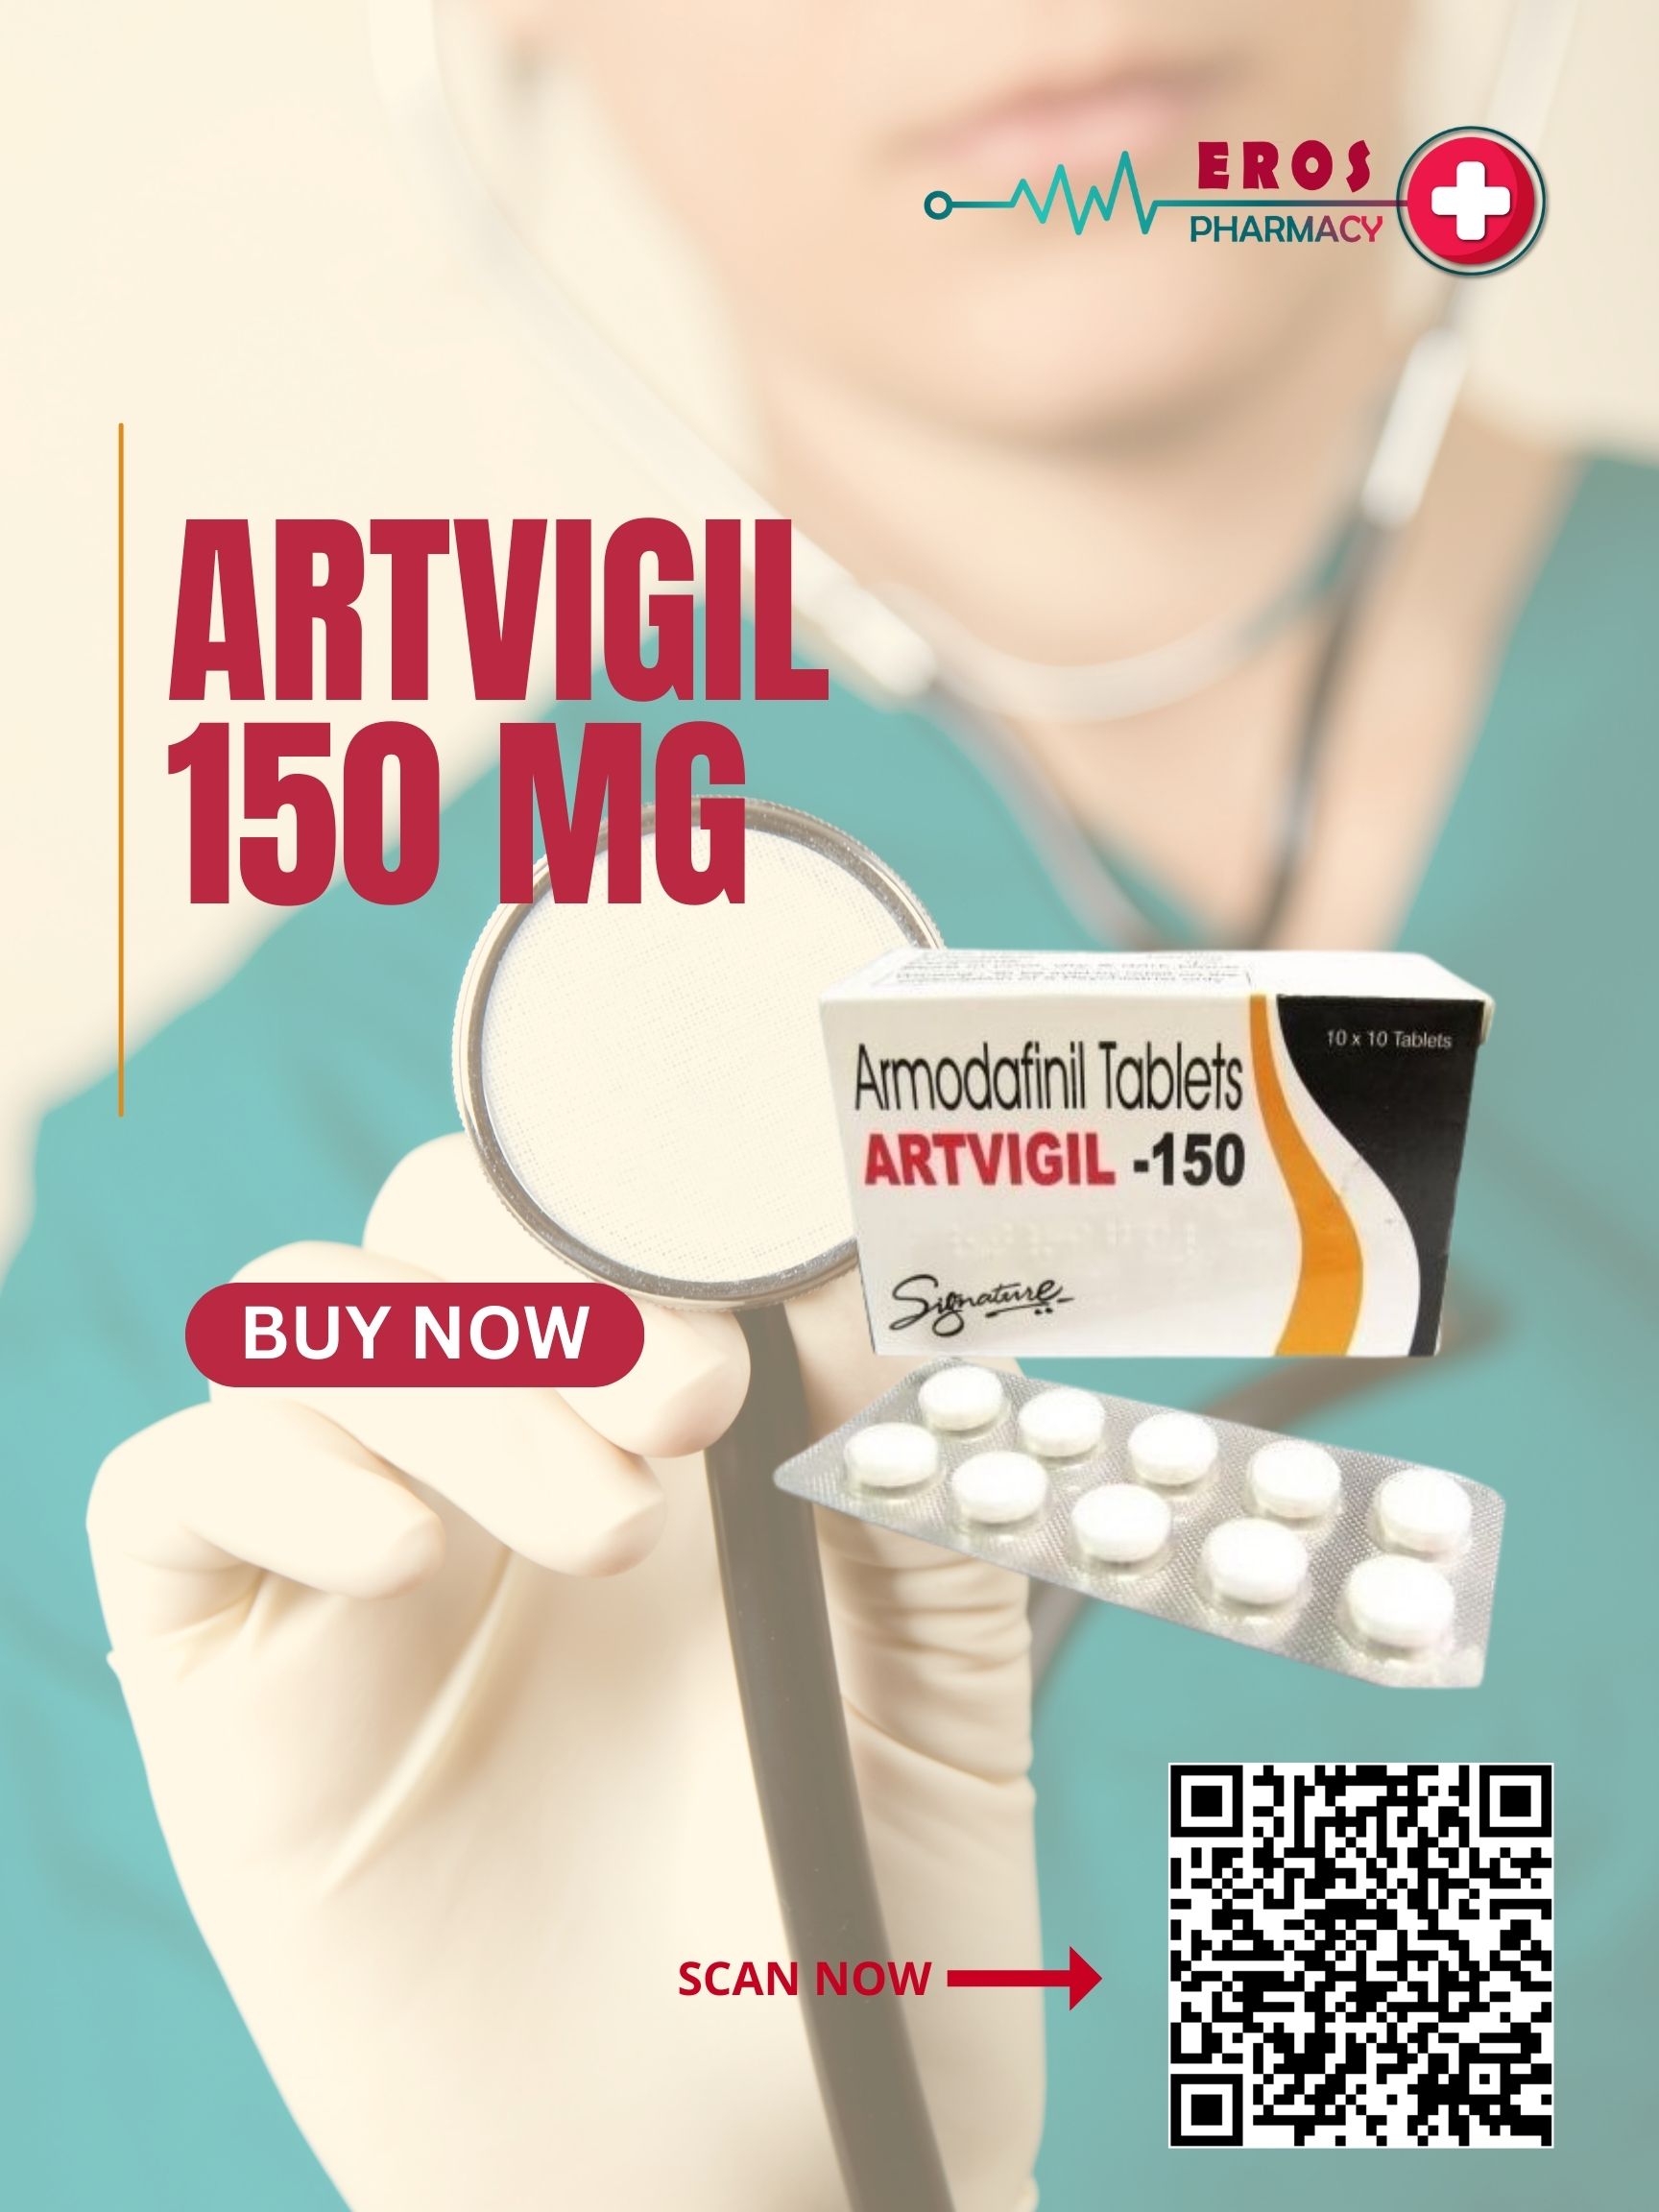 The Ultimate Guide to Artvigil 150 Mg -  Online Health Guide Artvigil 150mg |  Buy Artvigil 150 | Armodafinil Artvigil 150